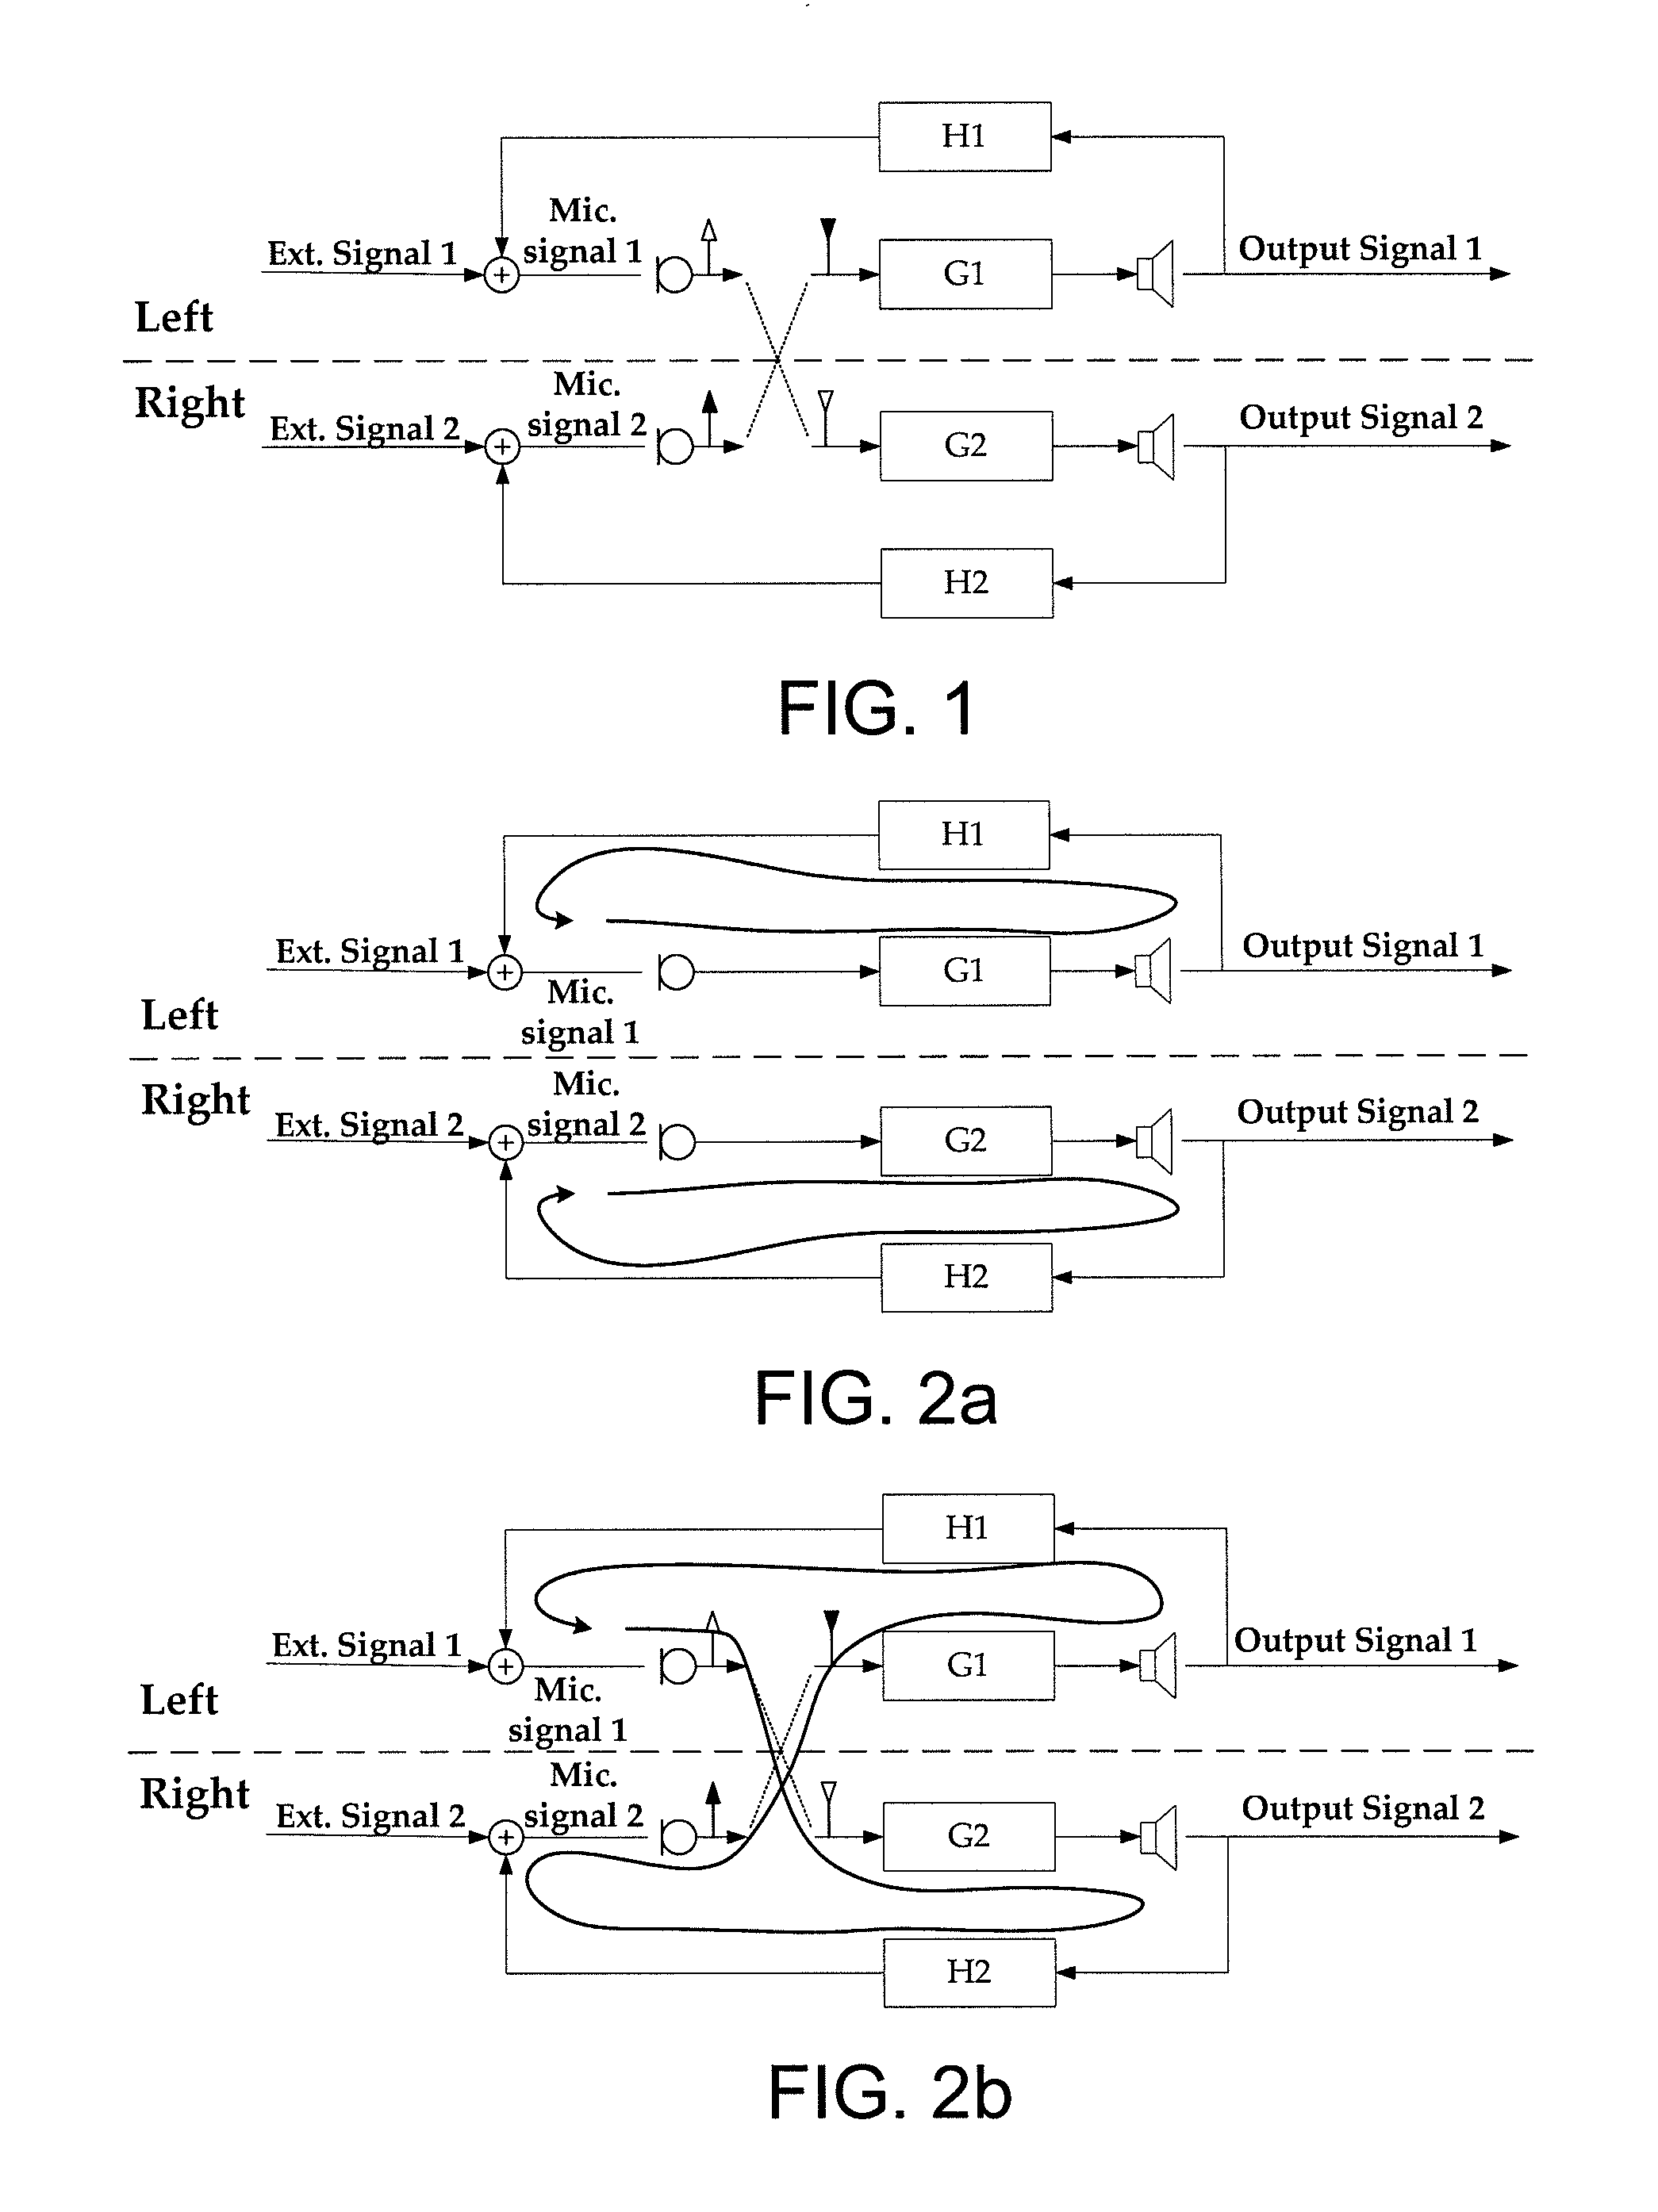 System for reducing acoustic feedback in hearing aids using inter-aural signal transmission, method and use